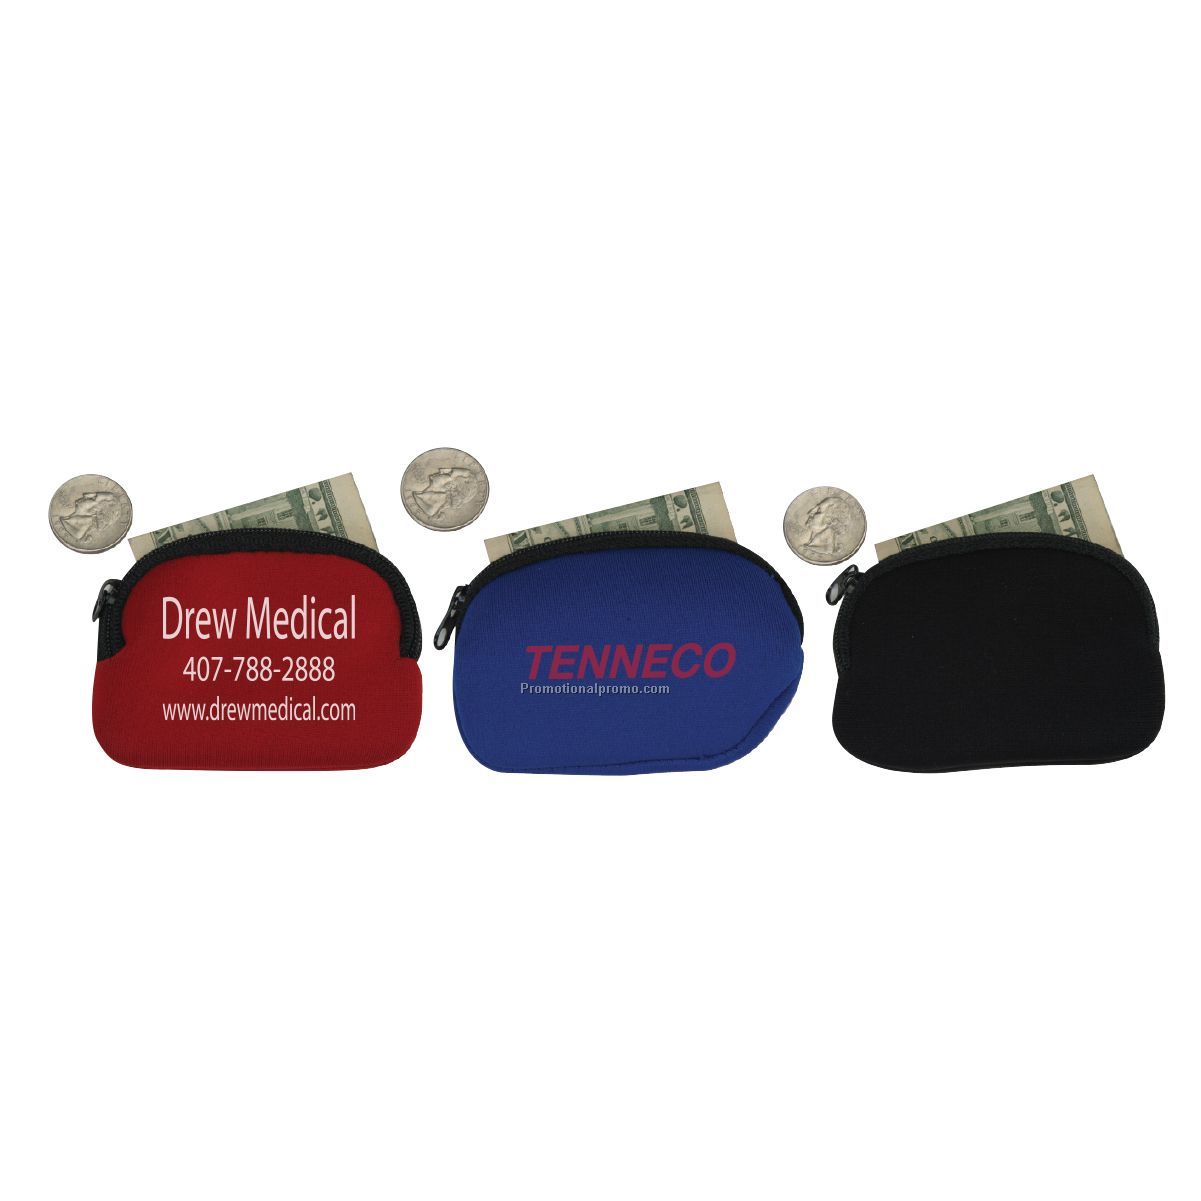 4MM neoprene zippered coin pouch for kids.  4